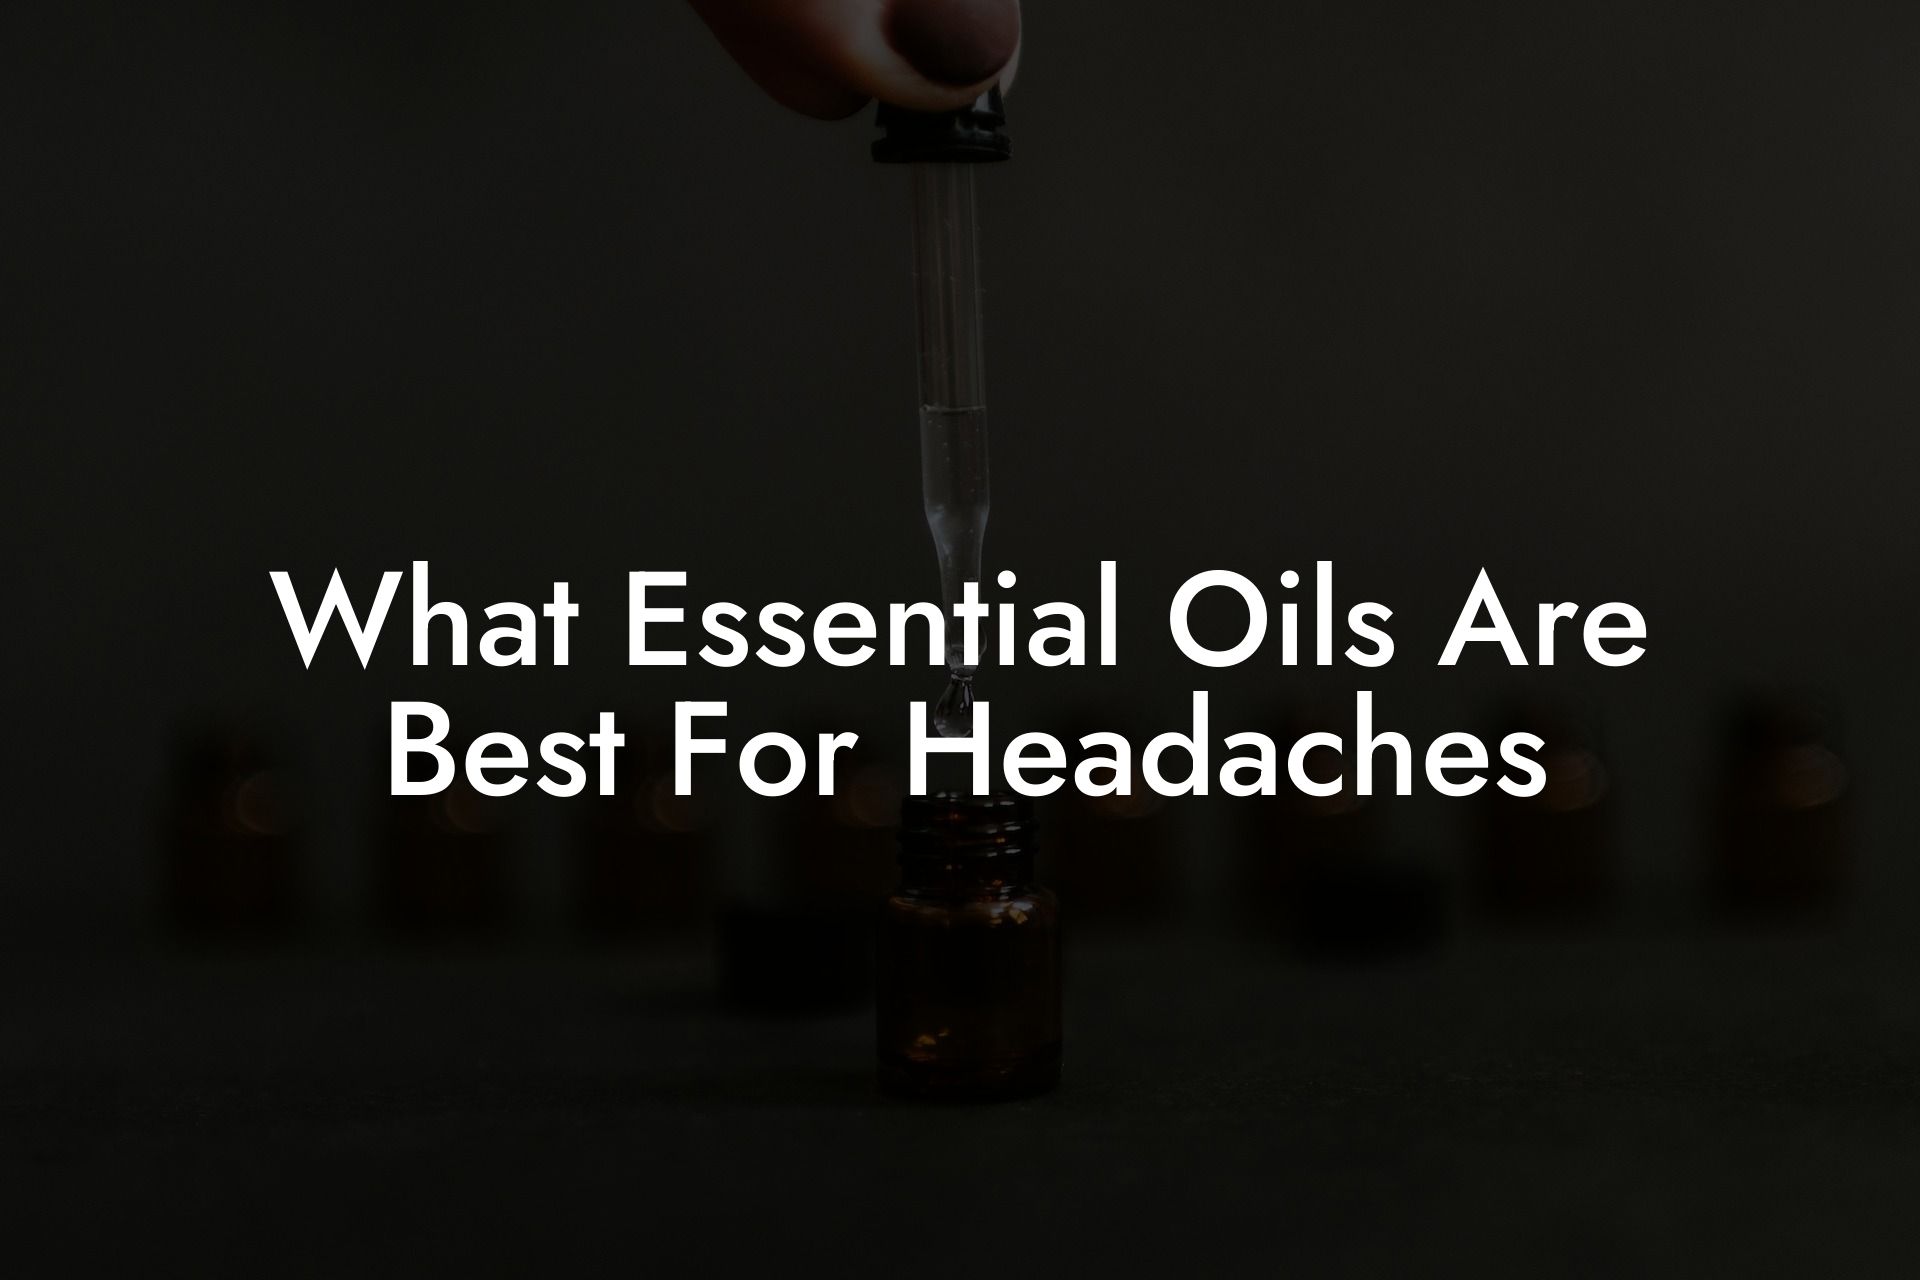 What Essential Oils Are Best For Headaches